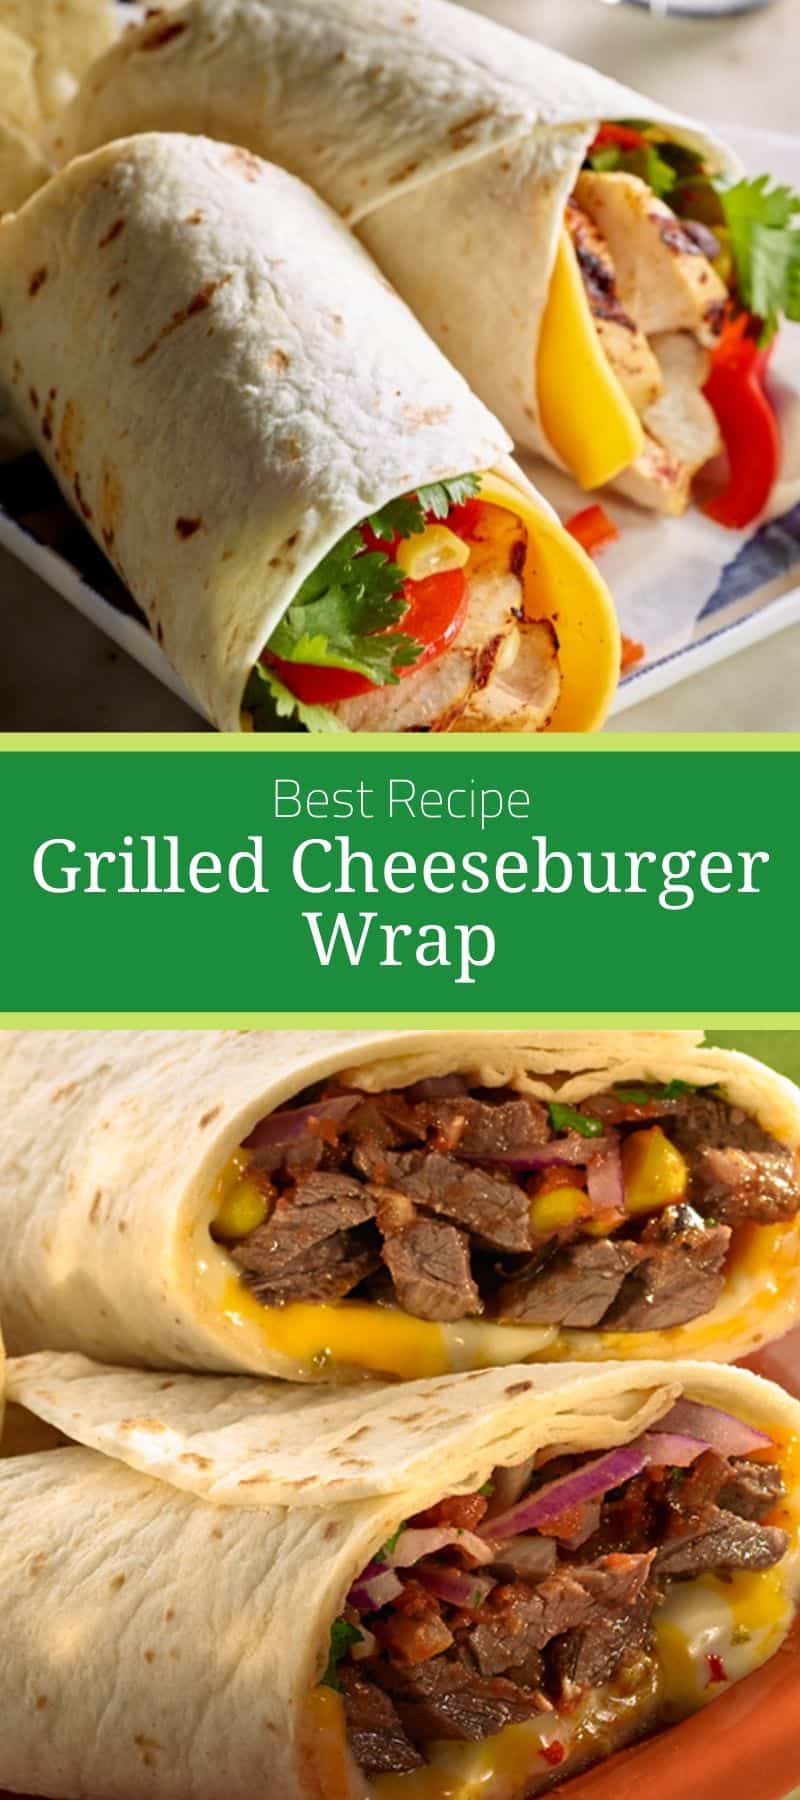 Best Grilled Cheeseburger Wrap Recipe 3